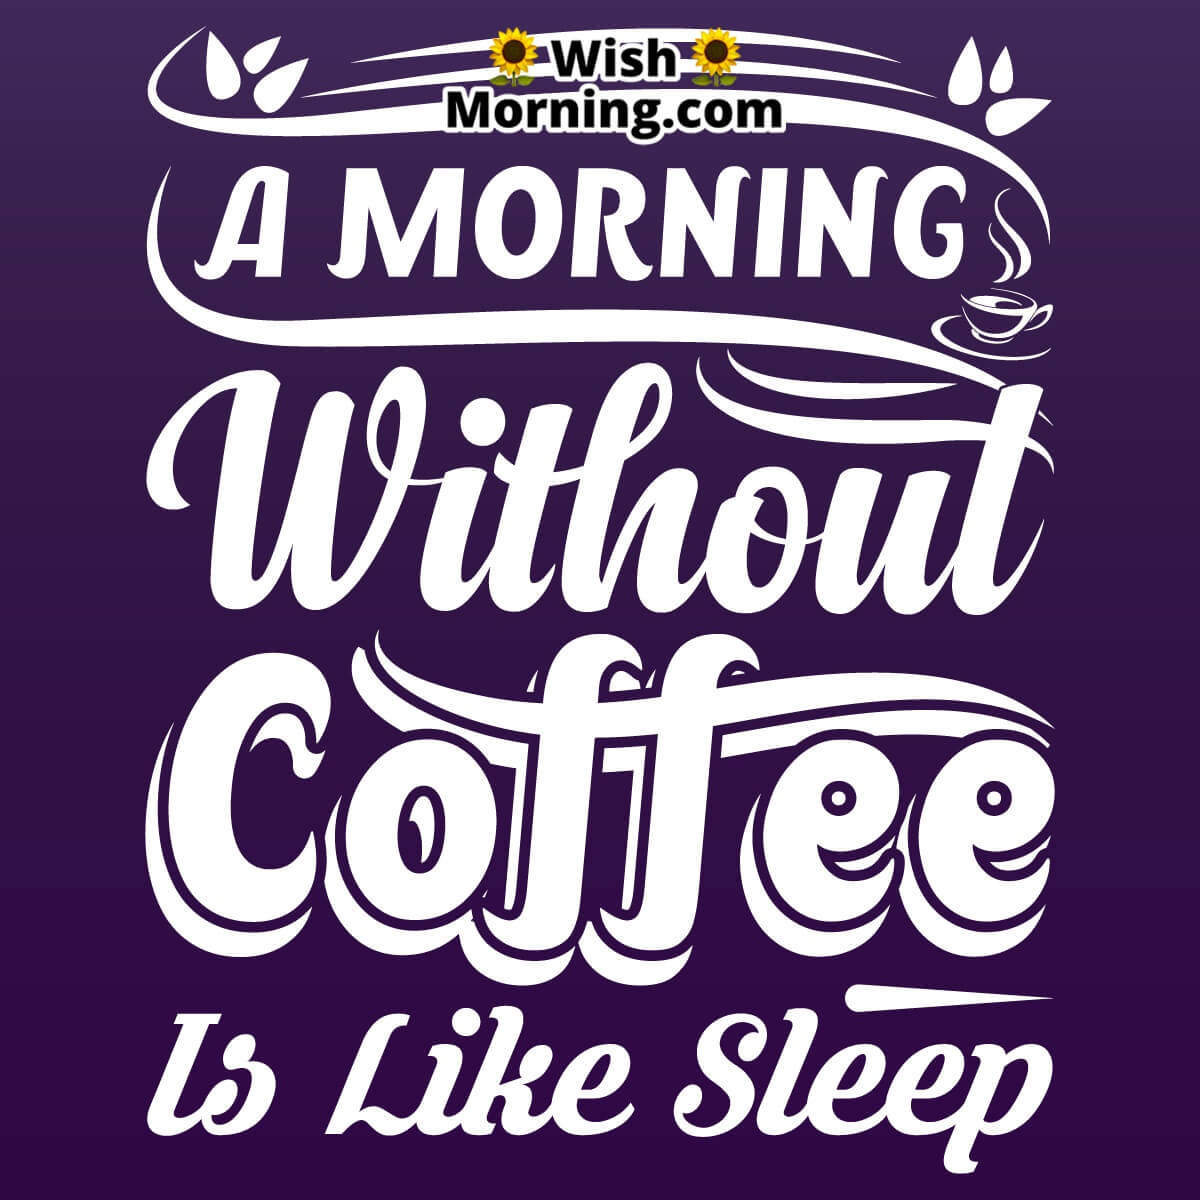 A Morning Without Coffee Is Like Sleep